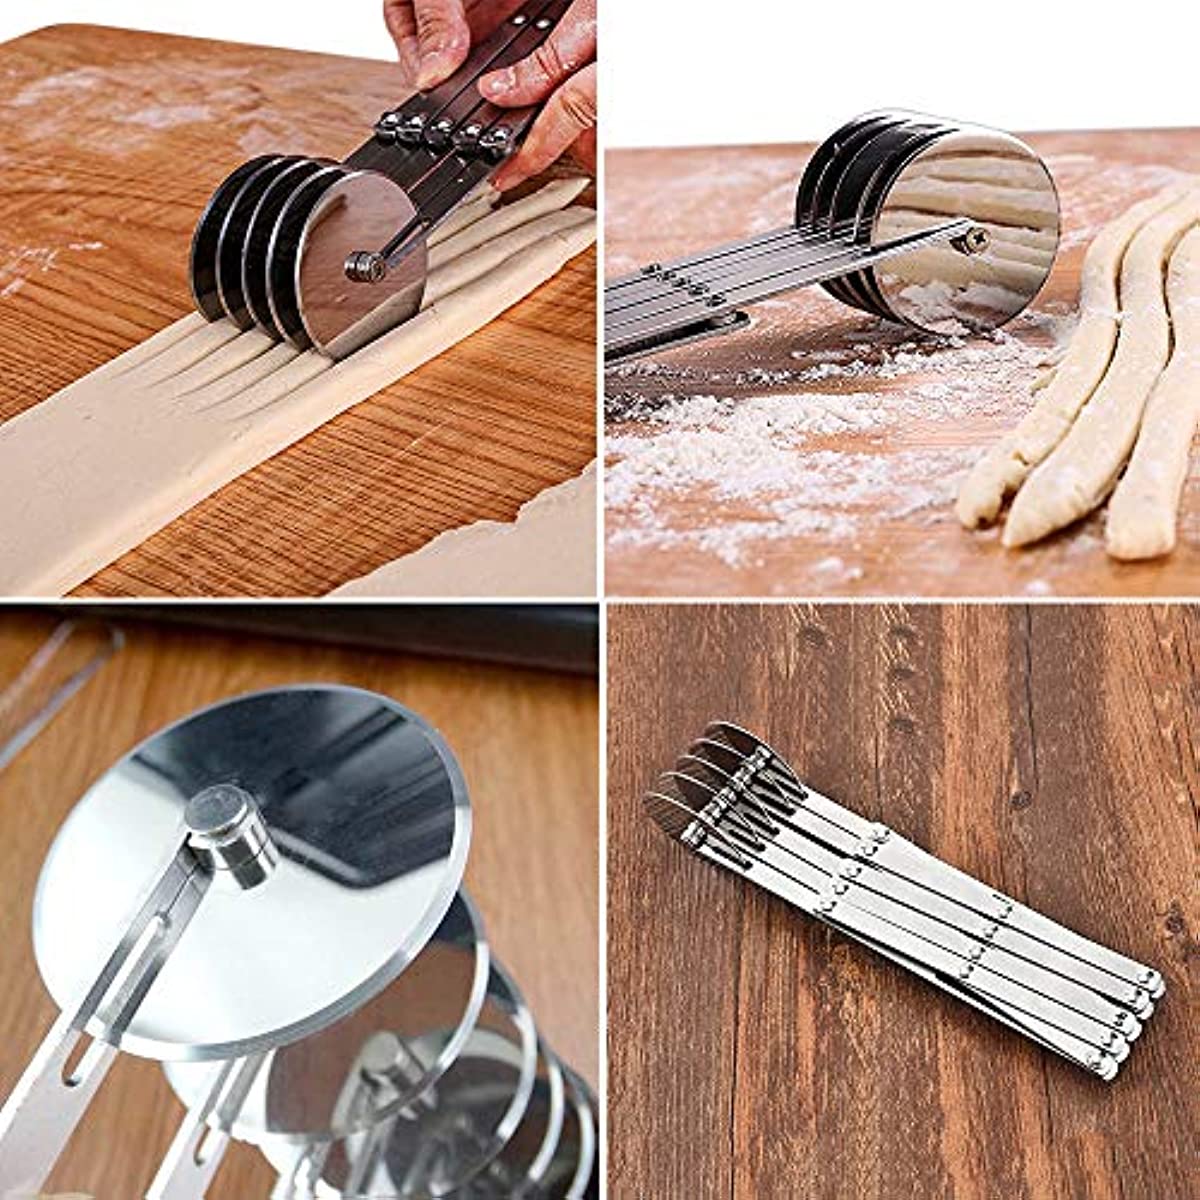 7 Wheel Stainless Steel Pastry Cutter,Expandable Pizza Slicer,Adjustable Cutter Roller Cookie Dough Cutter Divider